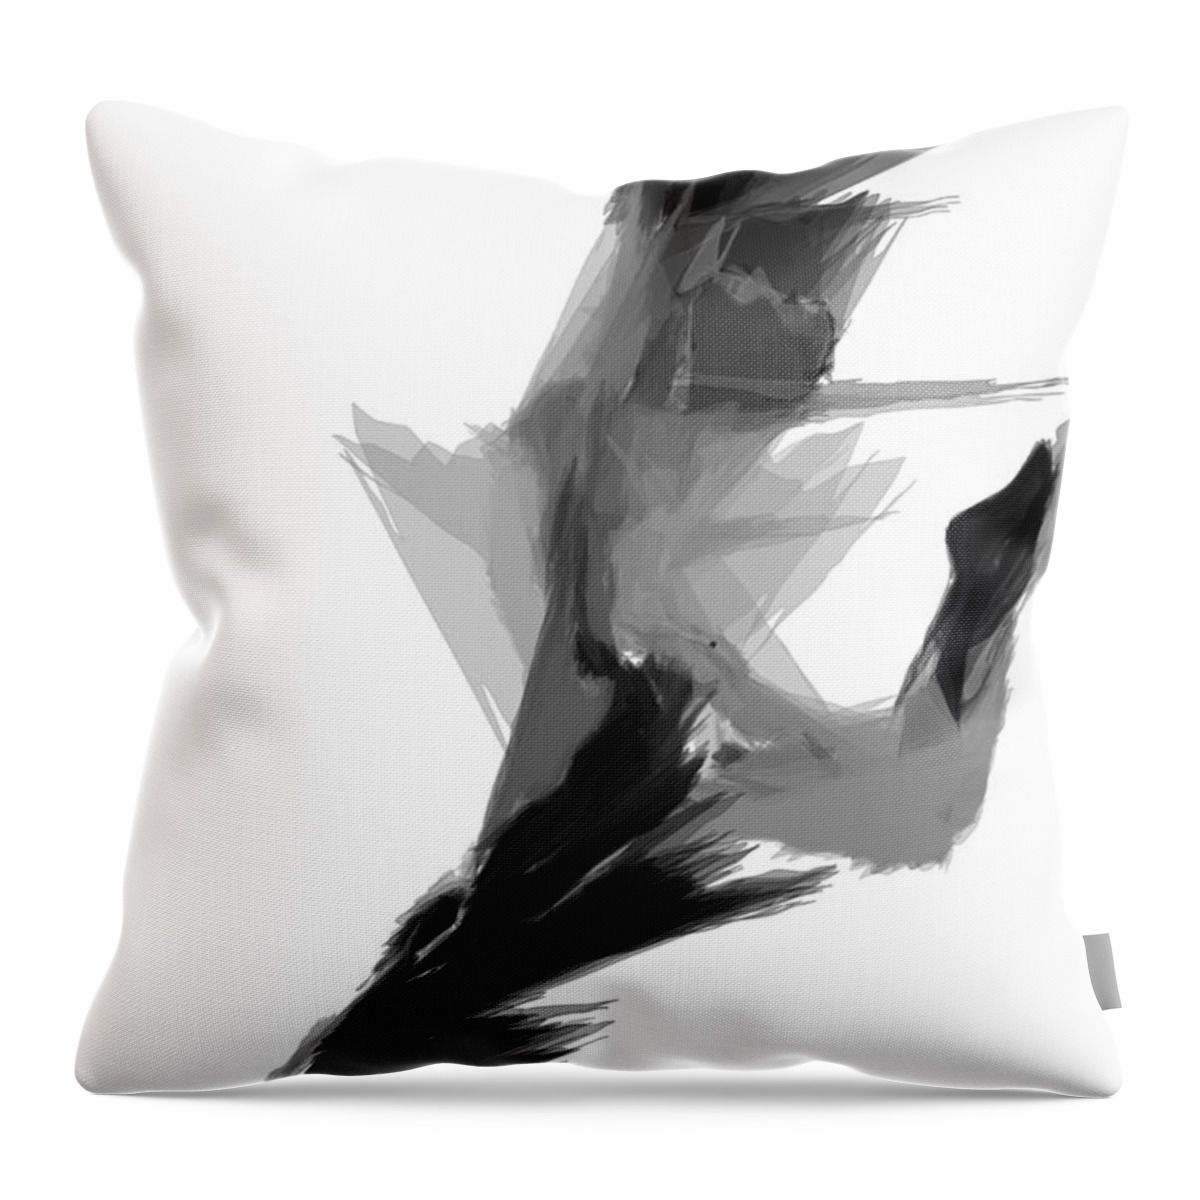 Sketches Throw Pillow featuring the digital art Abstract Dance by Rafael Salazar